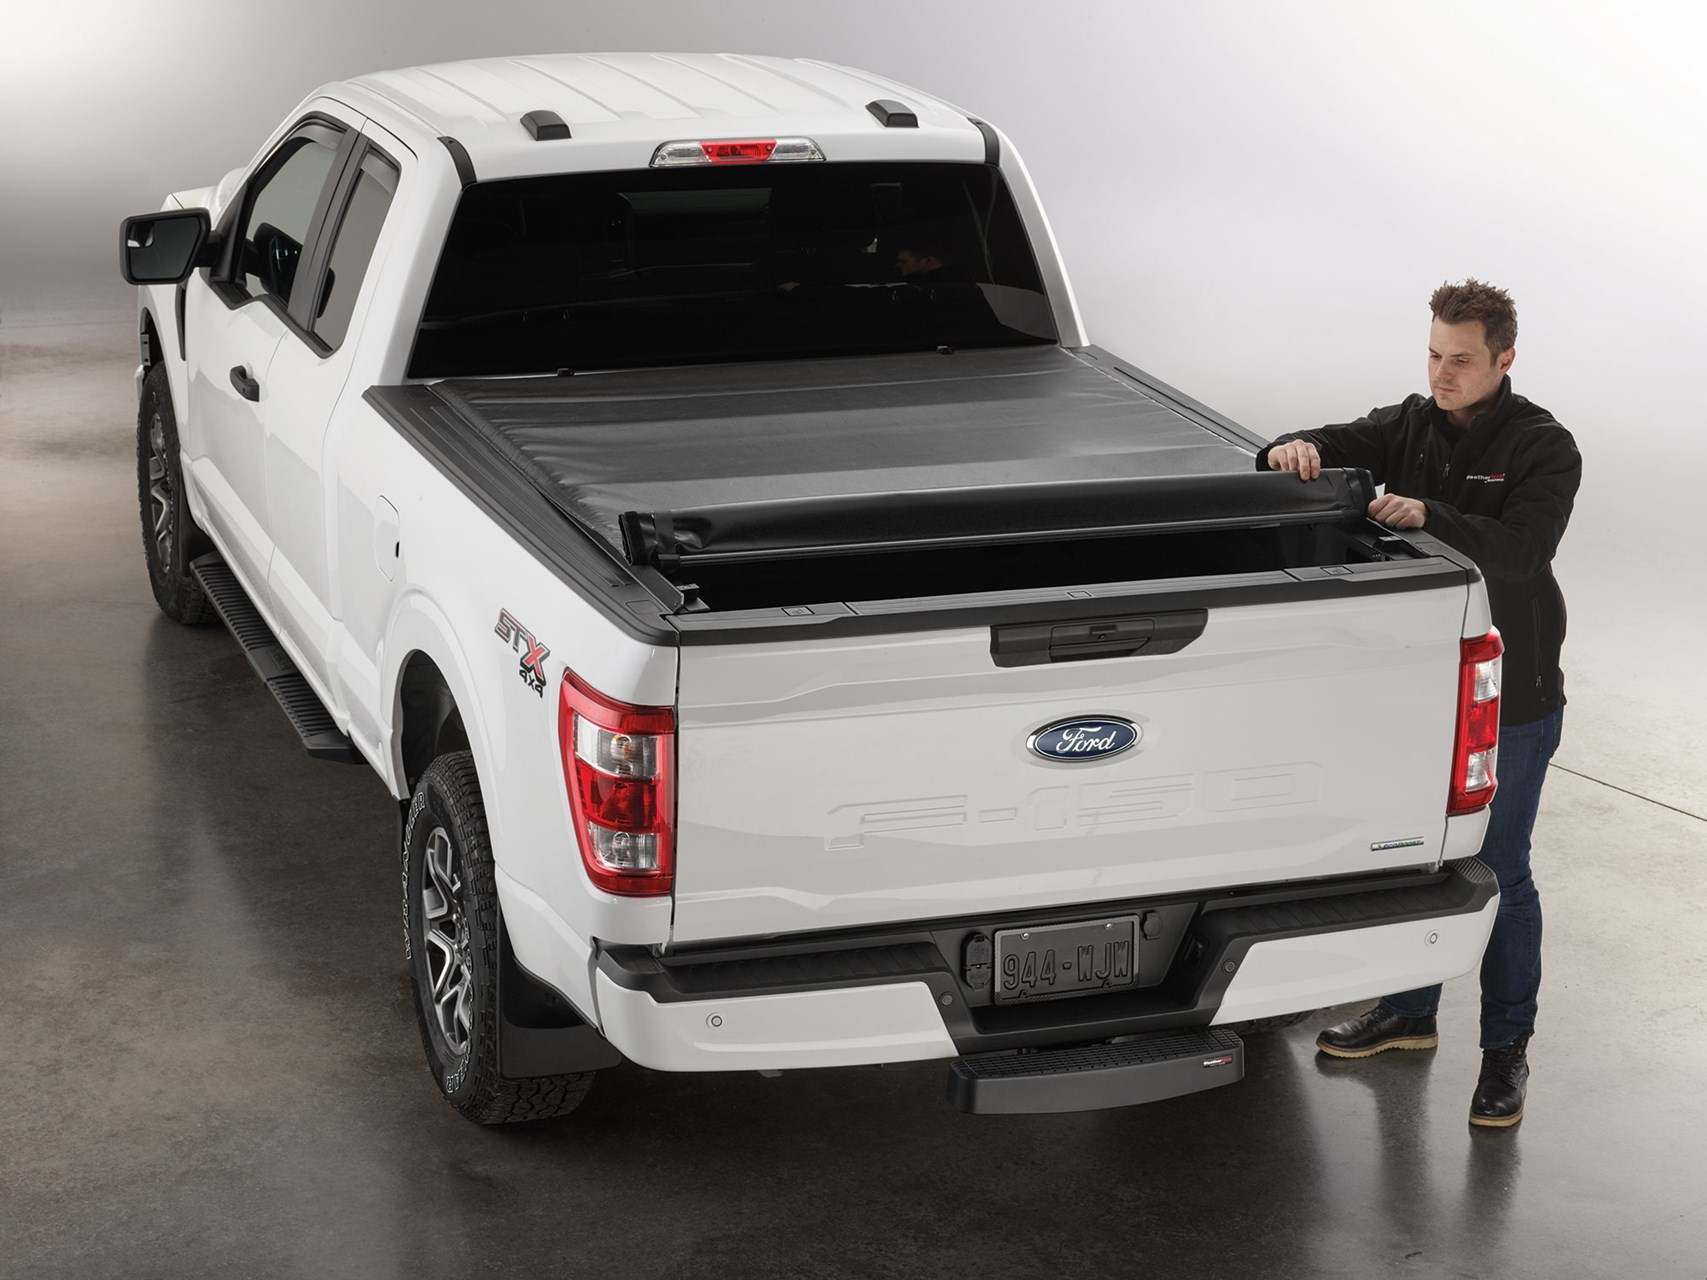 Weathertech Roll Up Tonneau Covers by Weathertech compressed